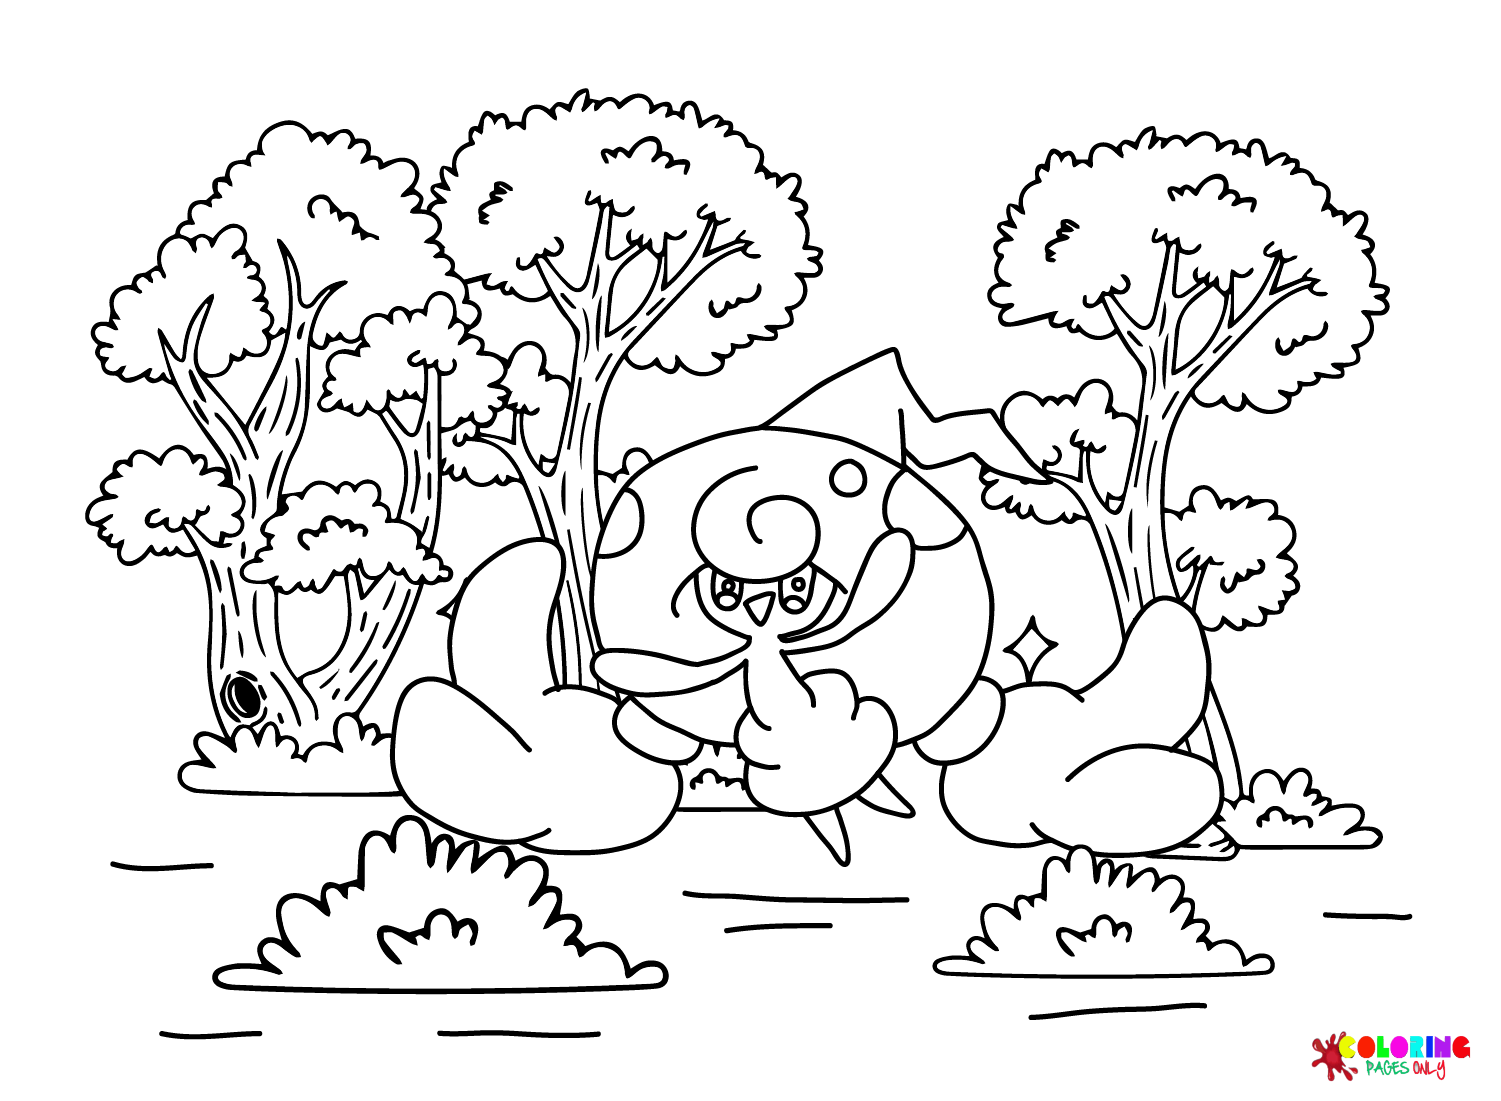 Hattrem to Print Coloring Page